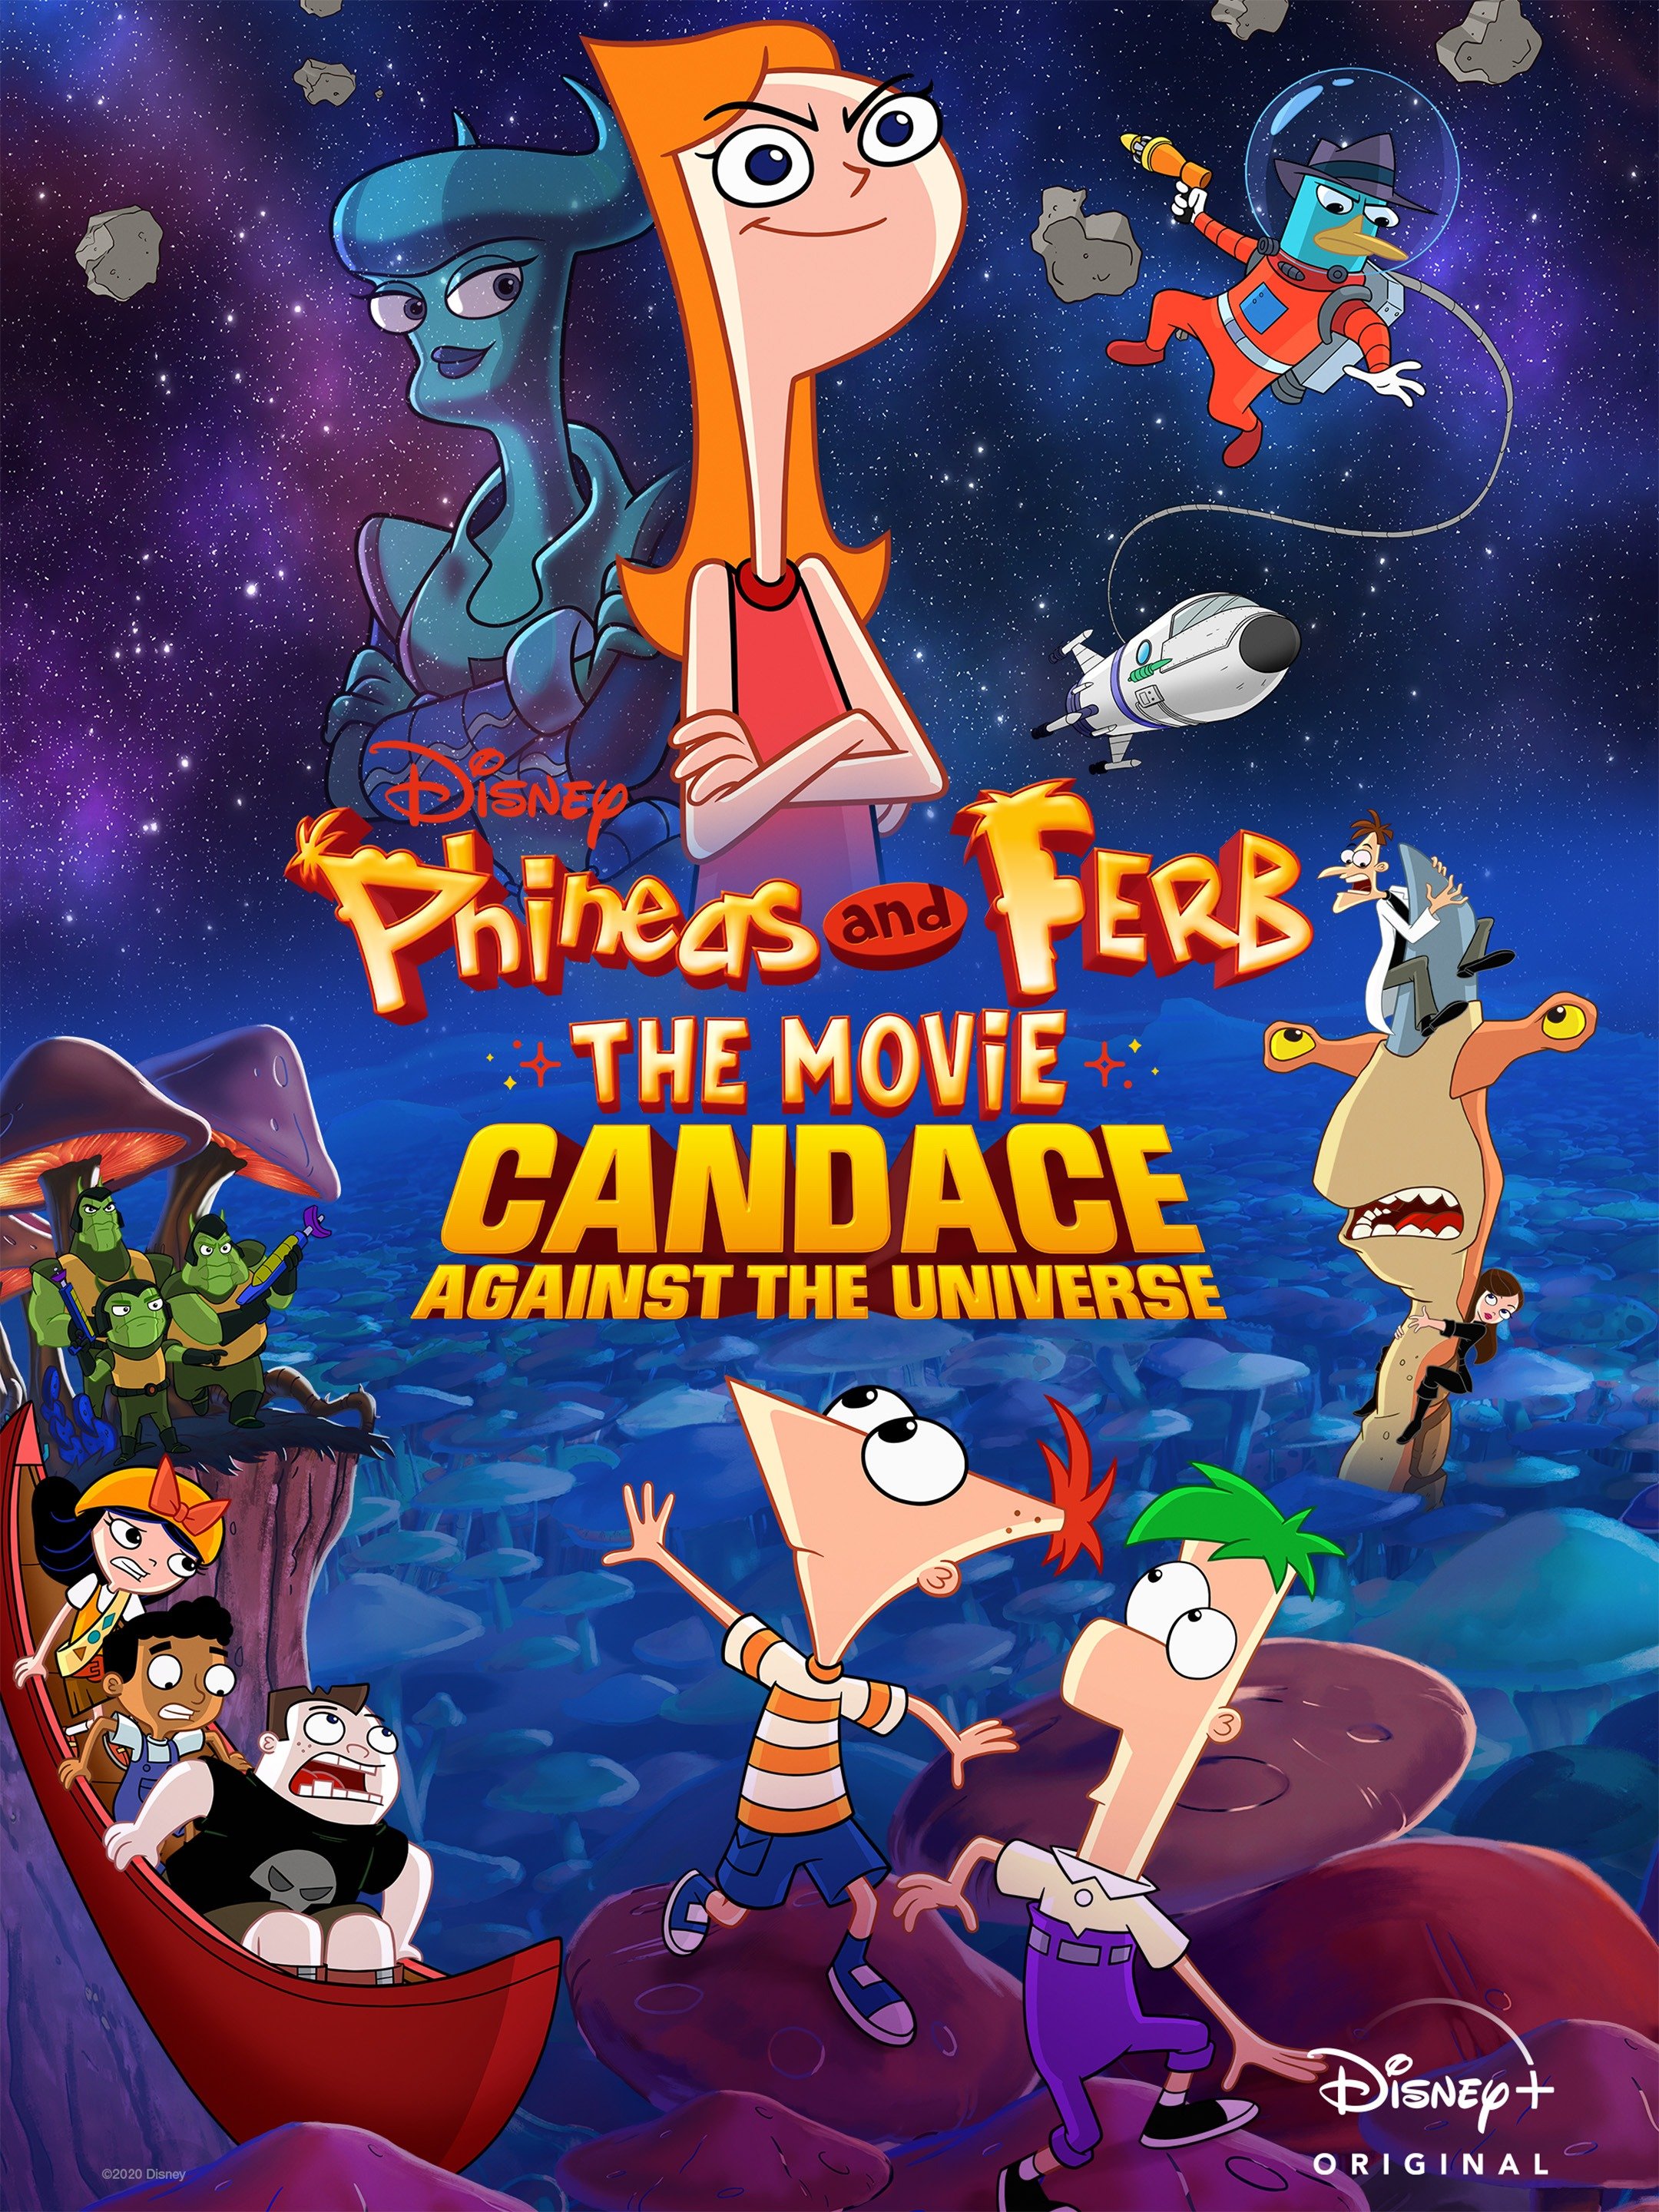 Phineas And Candace Having Sex - Phineas and Ferb the Movie: Candace Against the Universe: Trailer 1 -  Trailers & Videos - Rotten Tomatoes